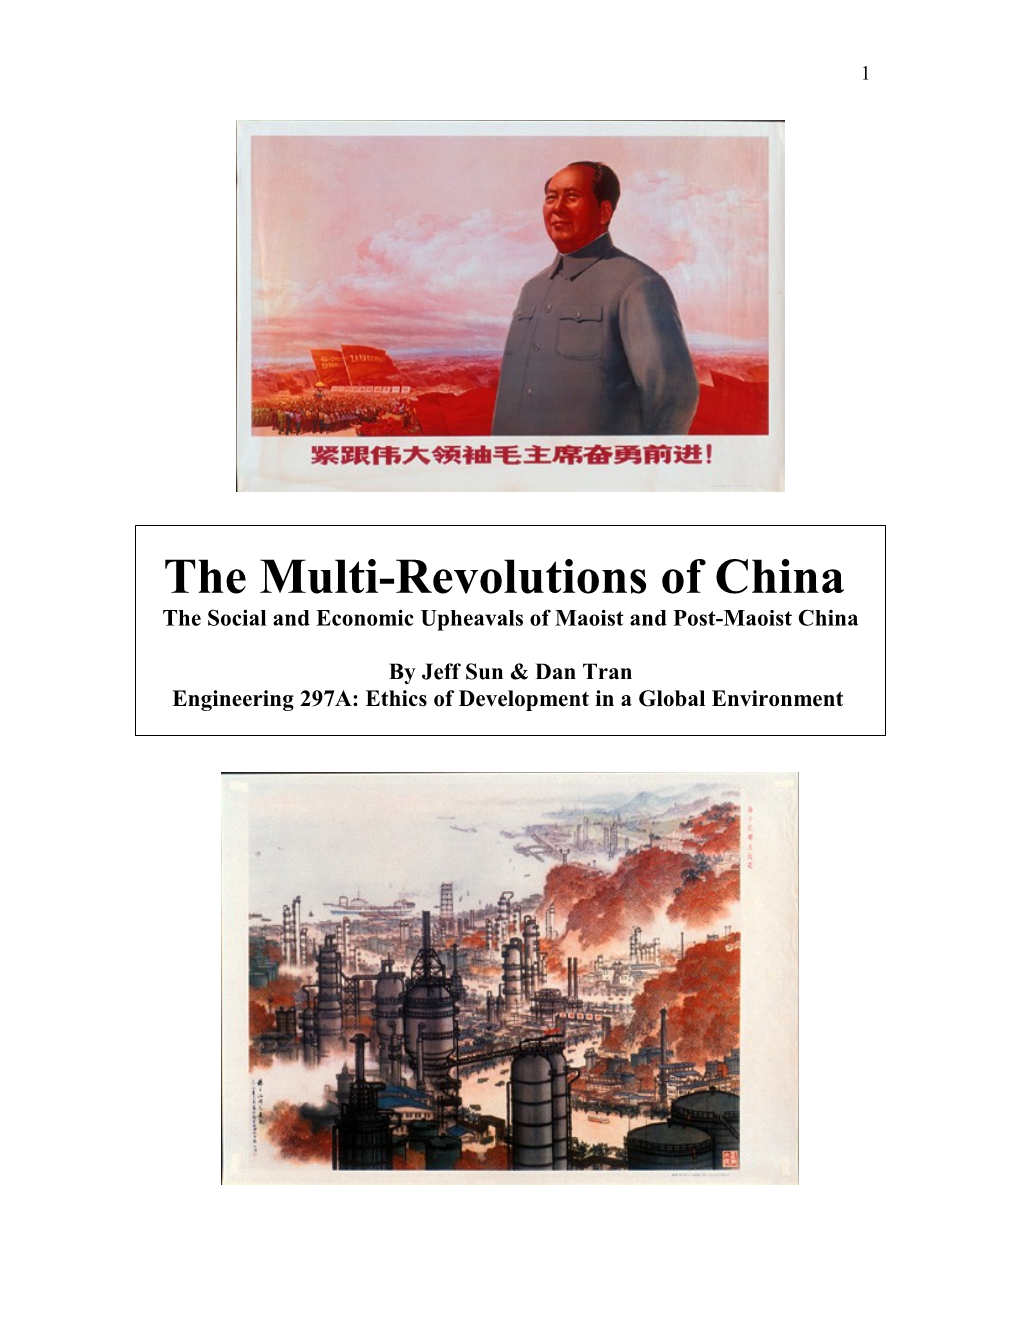 The Multi-Revolutions of China